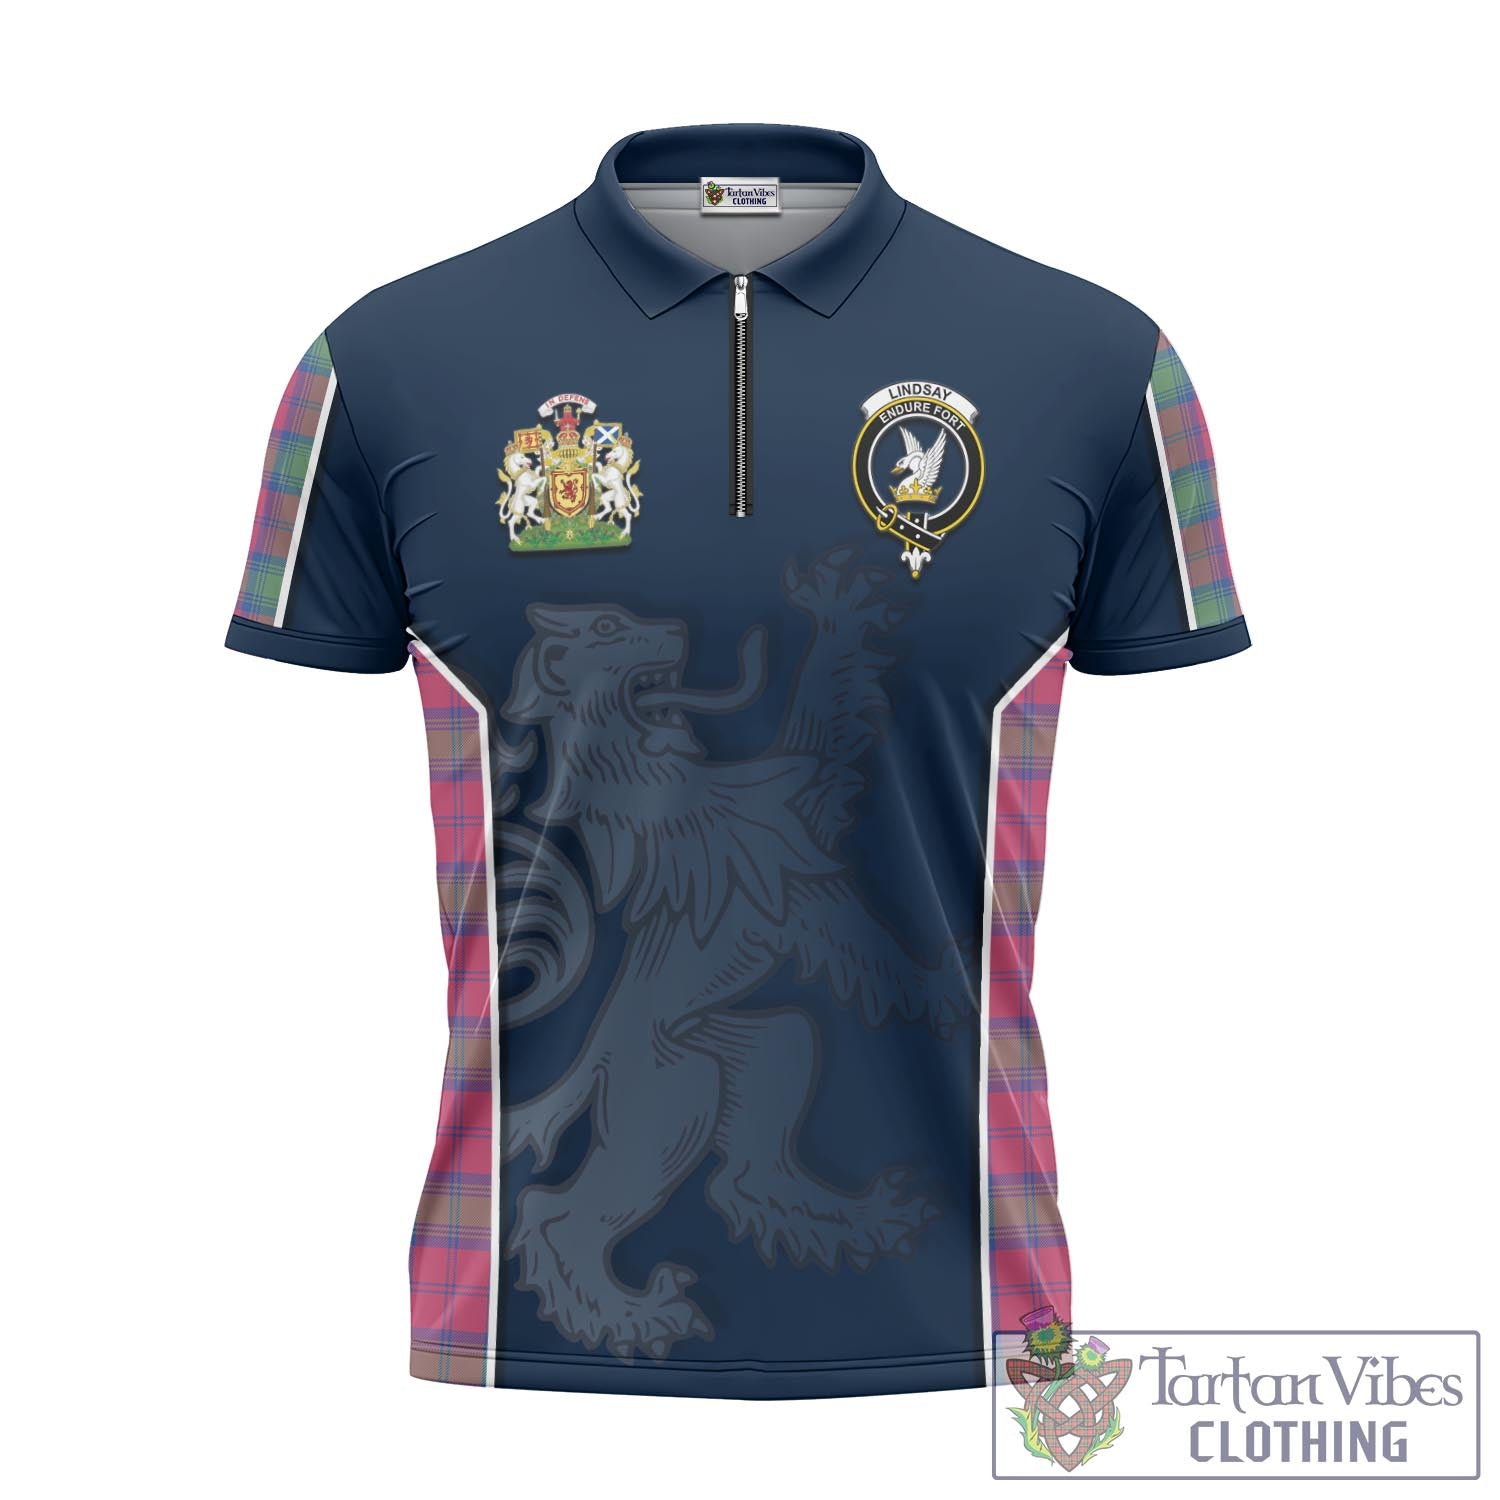 Tartan Vibes Clothing Lindsay Ancient Tartan Zipper Polo Shirt with Family Crest and Lion Rampant Vibes Sport Style